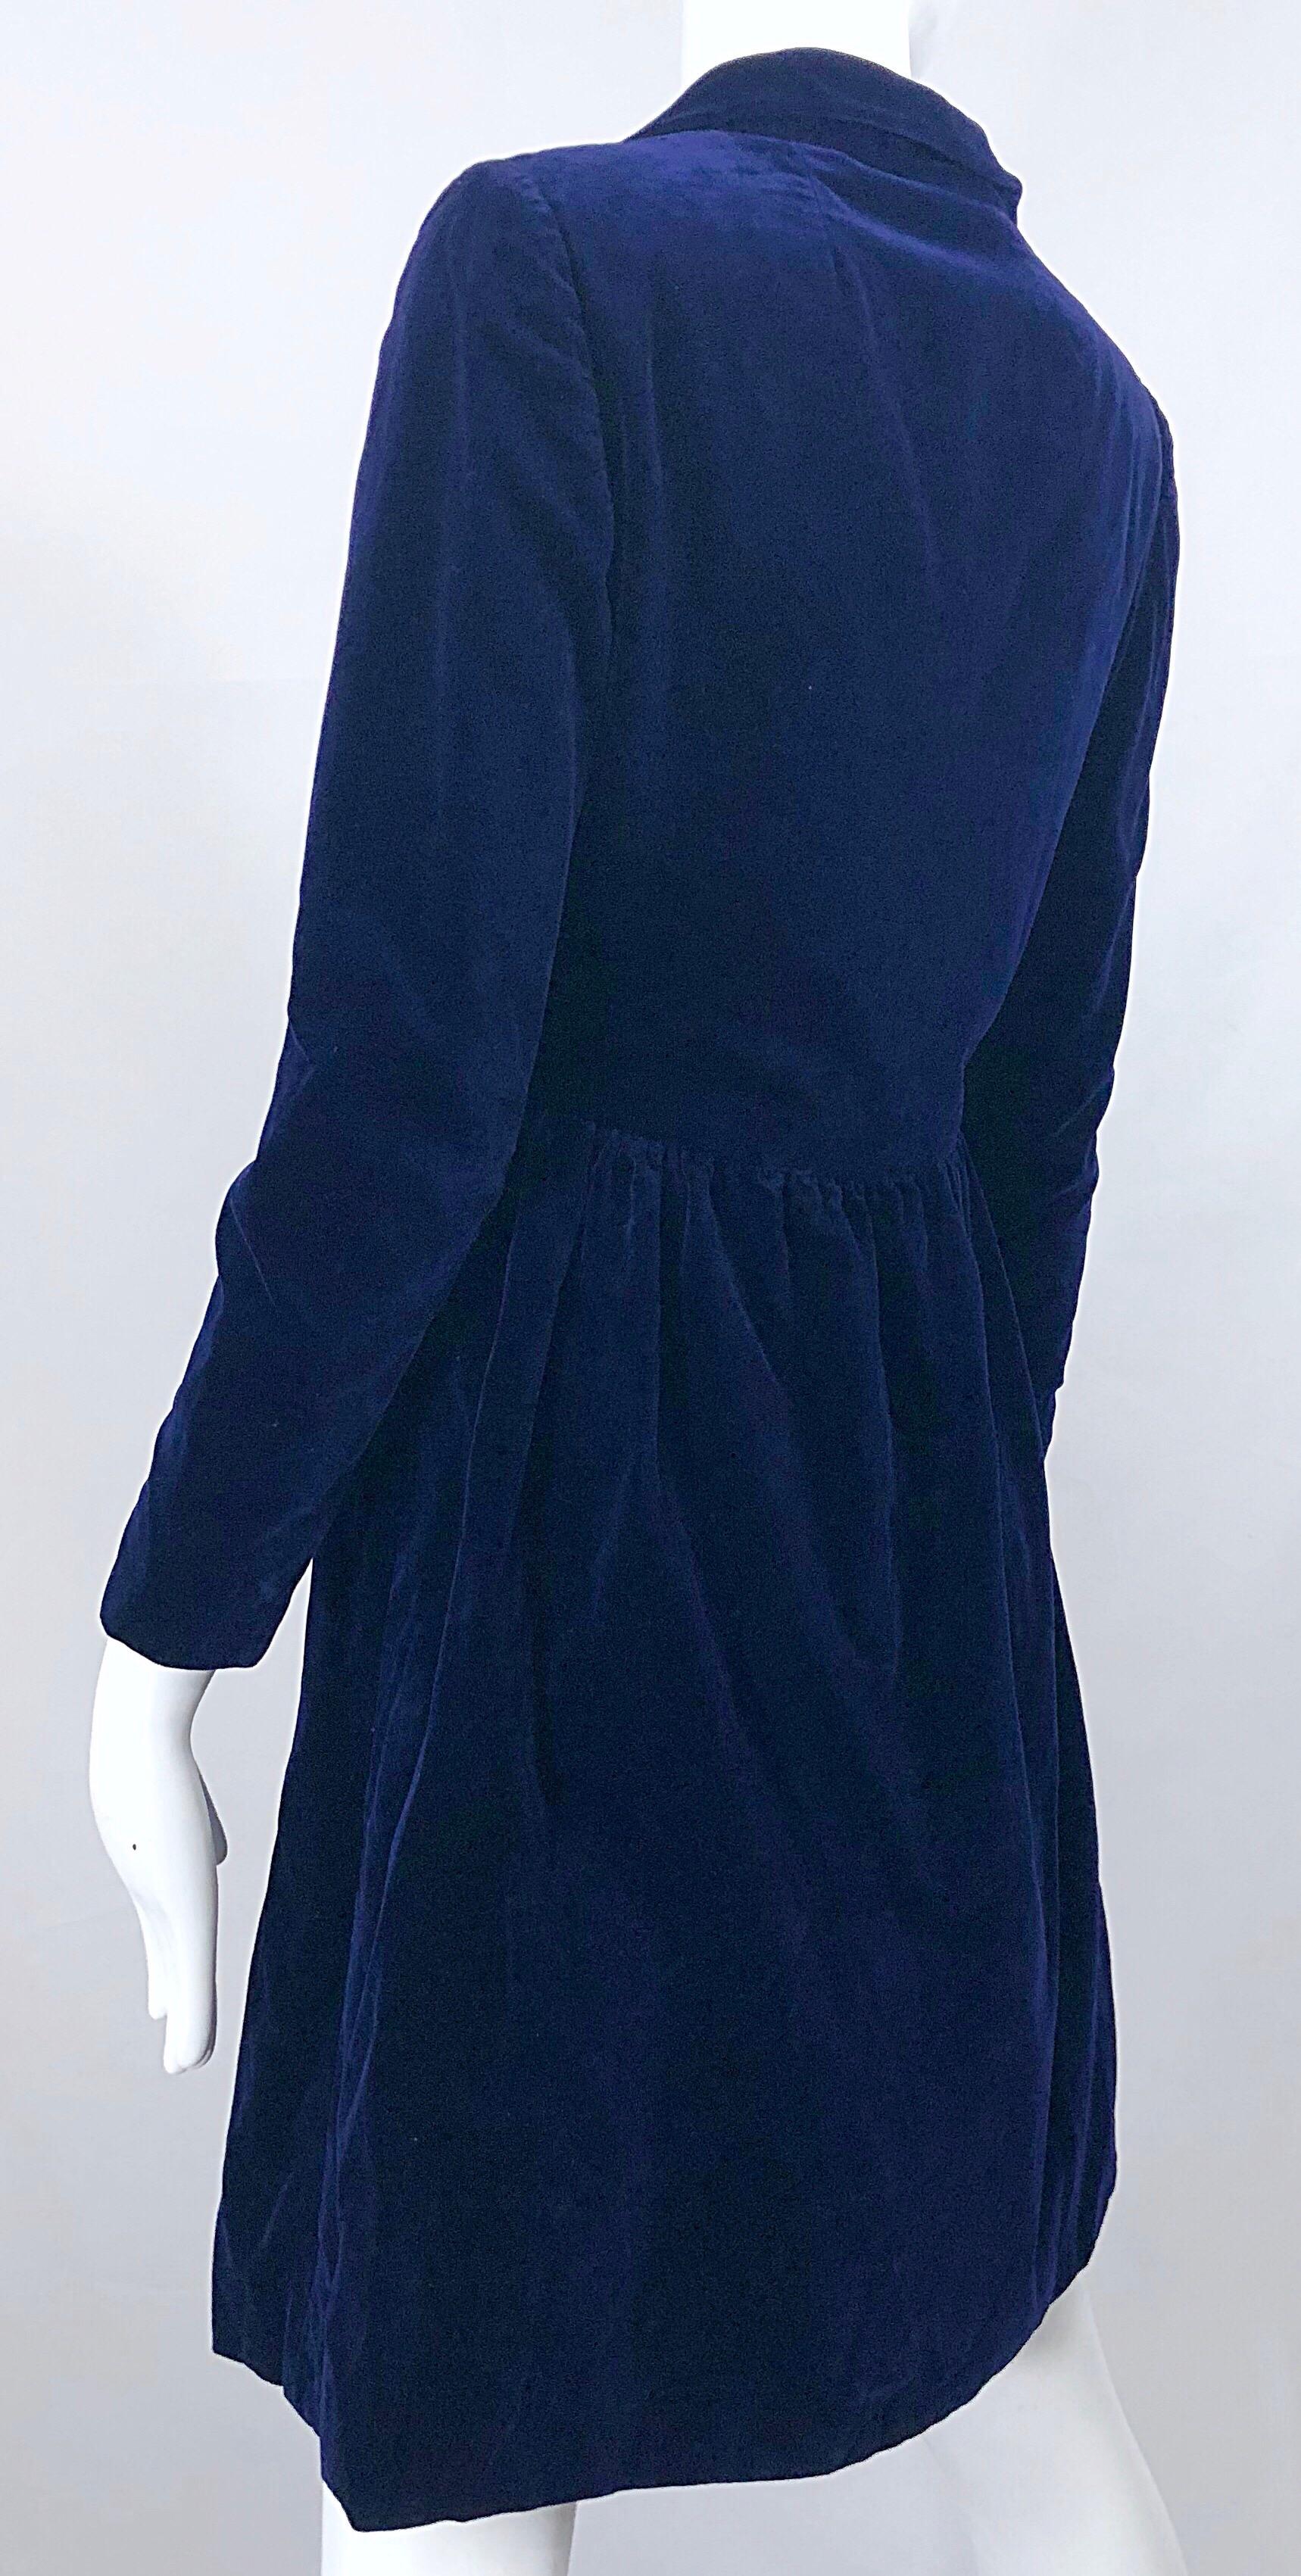 1950s Adele Simpson Navy Midnight Blue Velvet Vintage 50s Wrap Shirt Dress In Excellent Condition For Sale In San Diego, CA